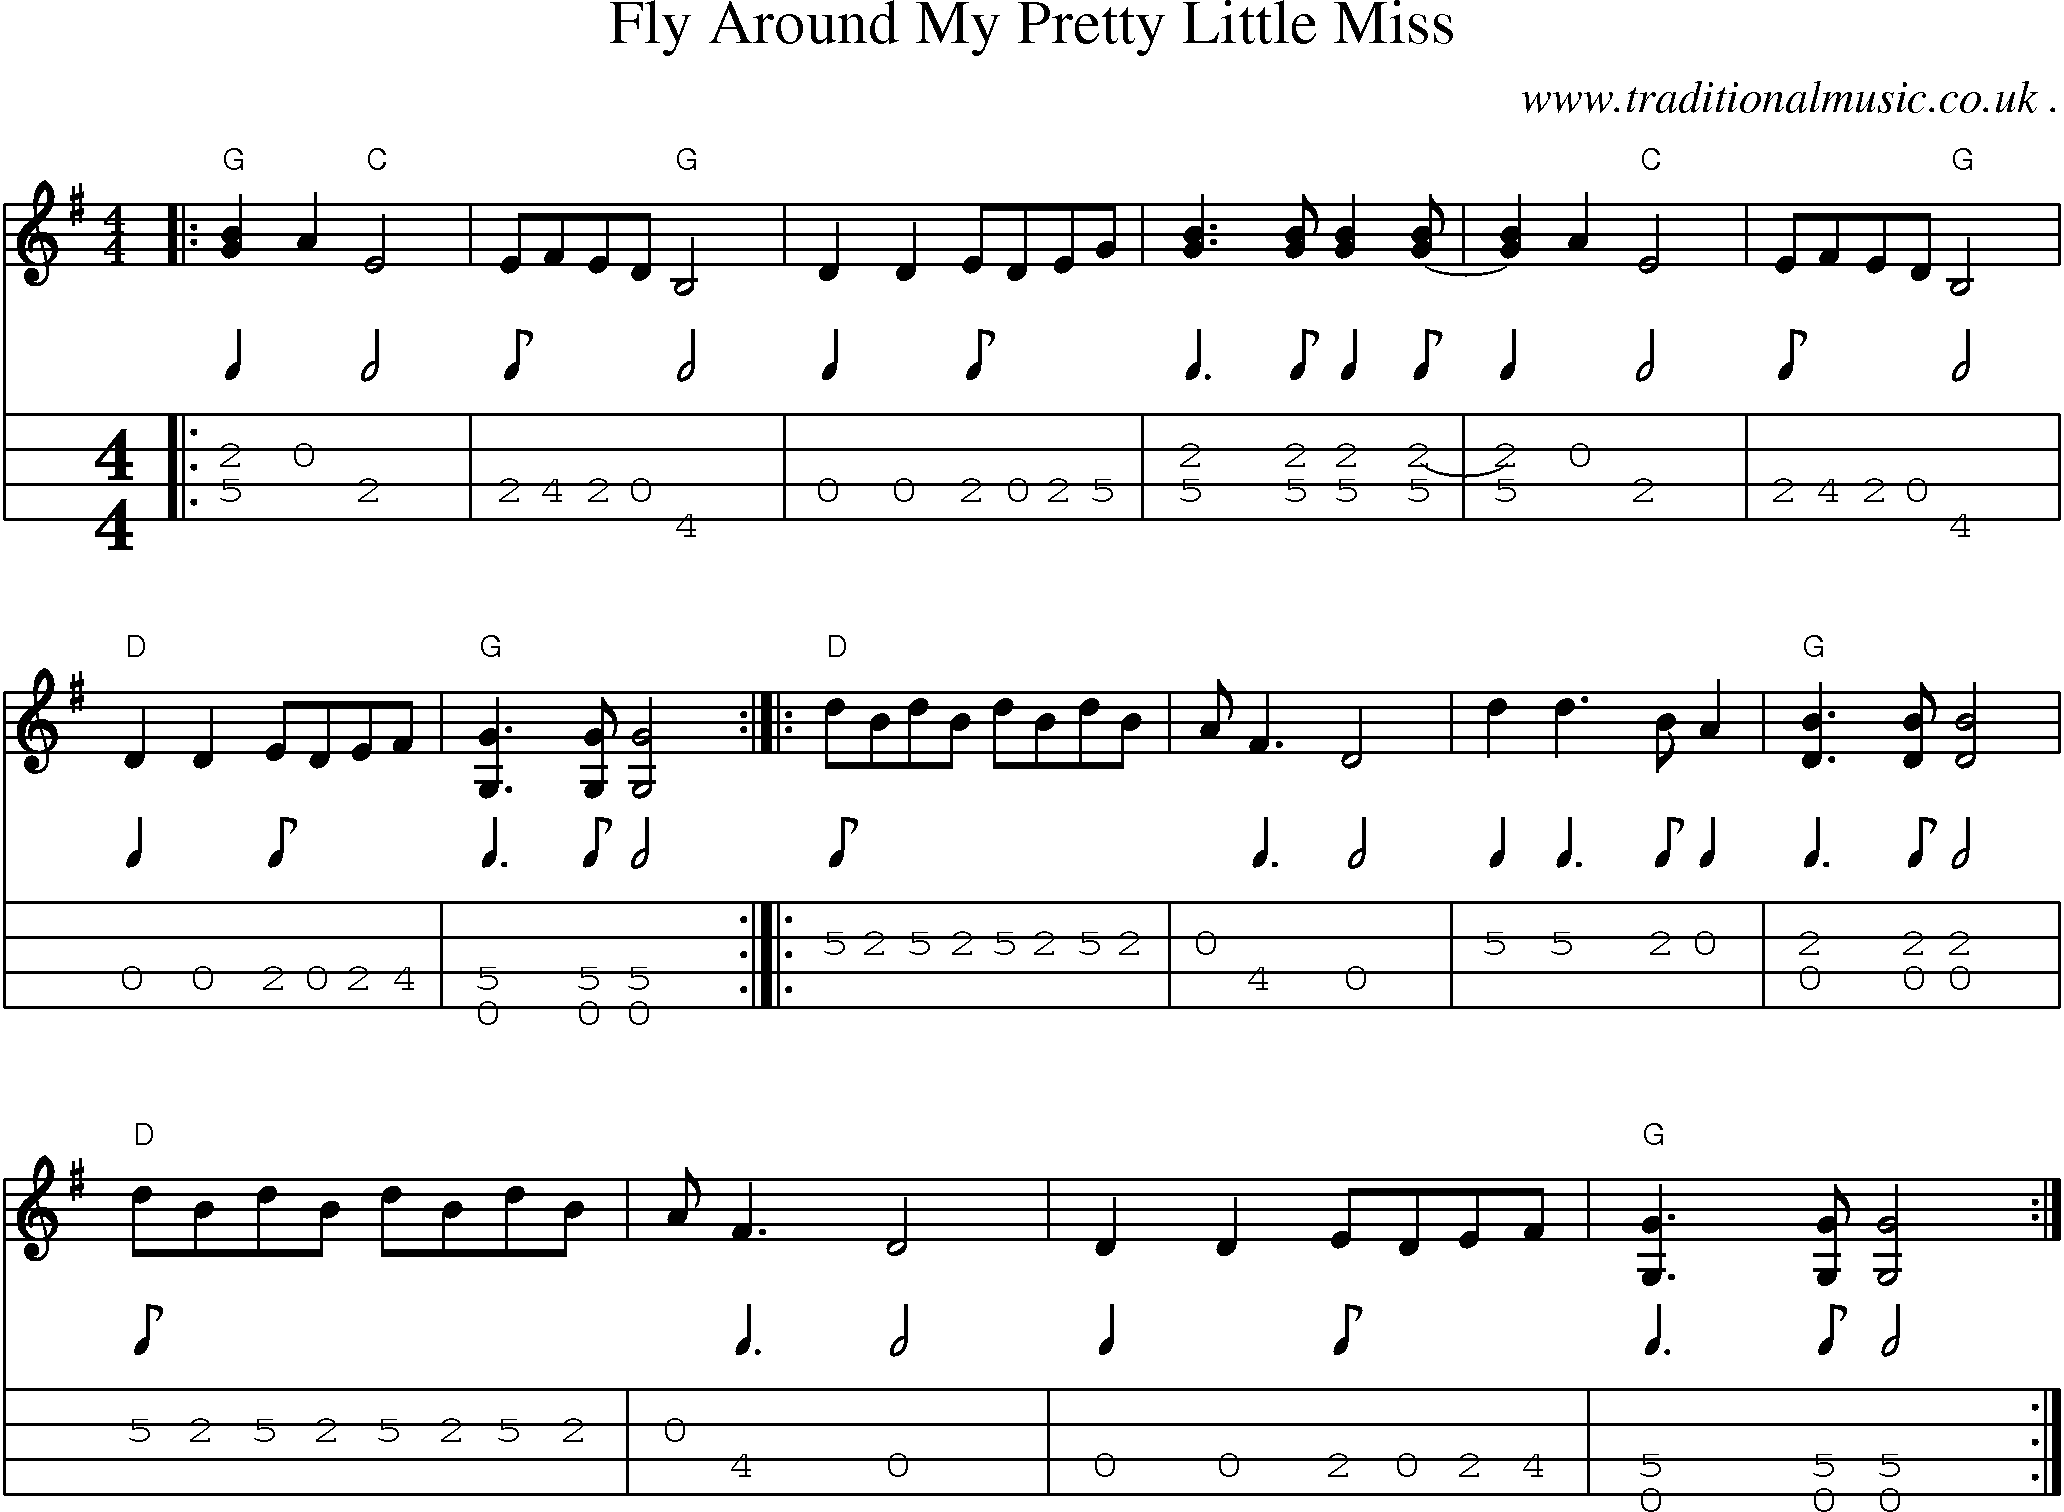 Music Score and Guitar Tabs for Fly Around My Pretty Little Miss